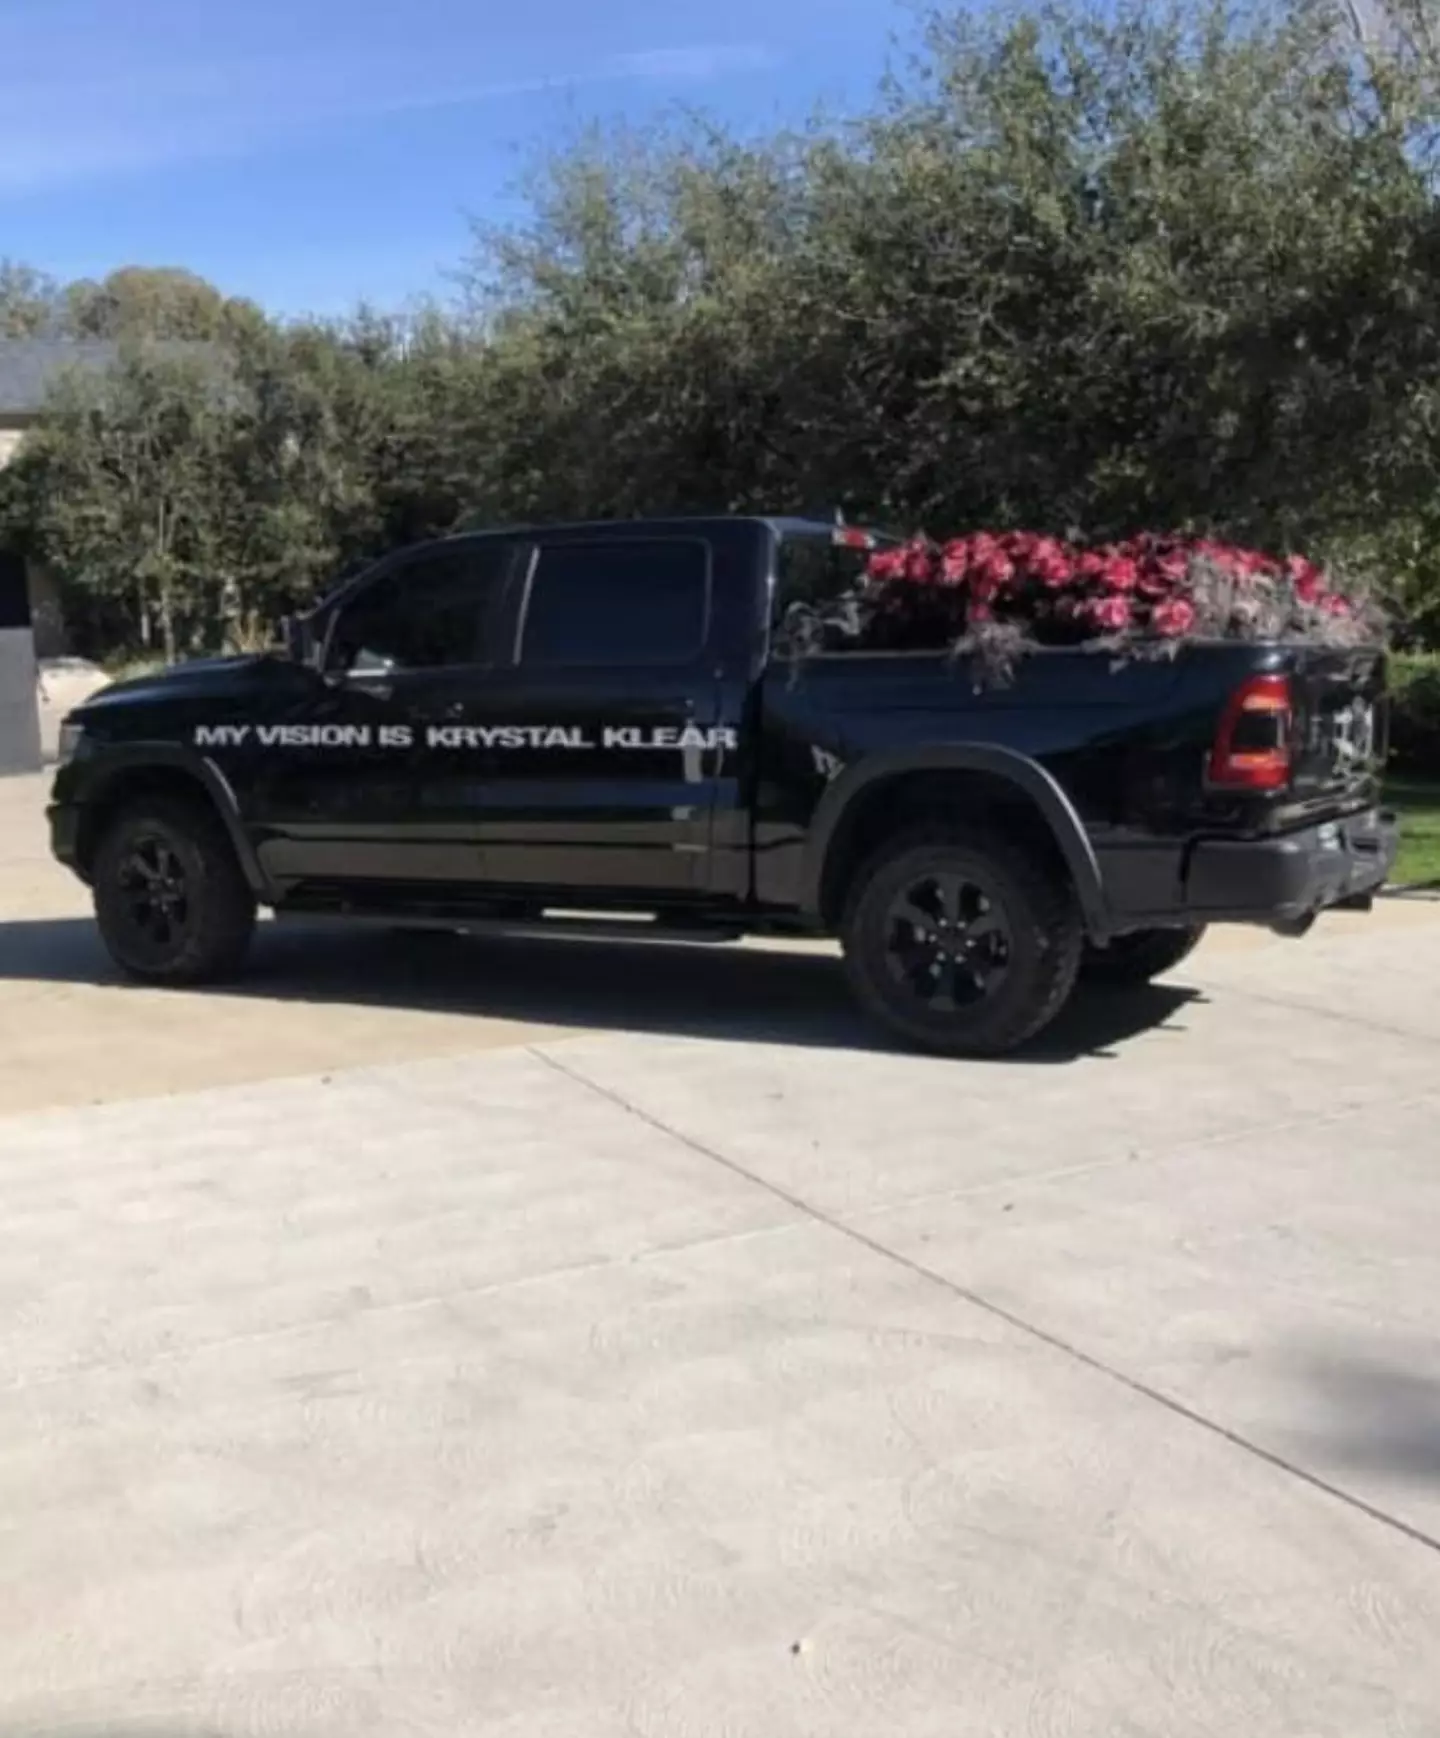 Kanye sent a truckload of roses to ex-wife Kim's house for Valentine's Day (